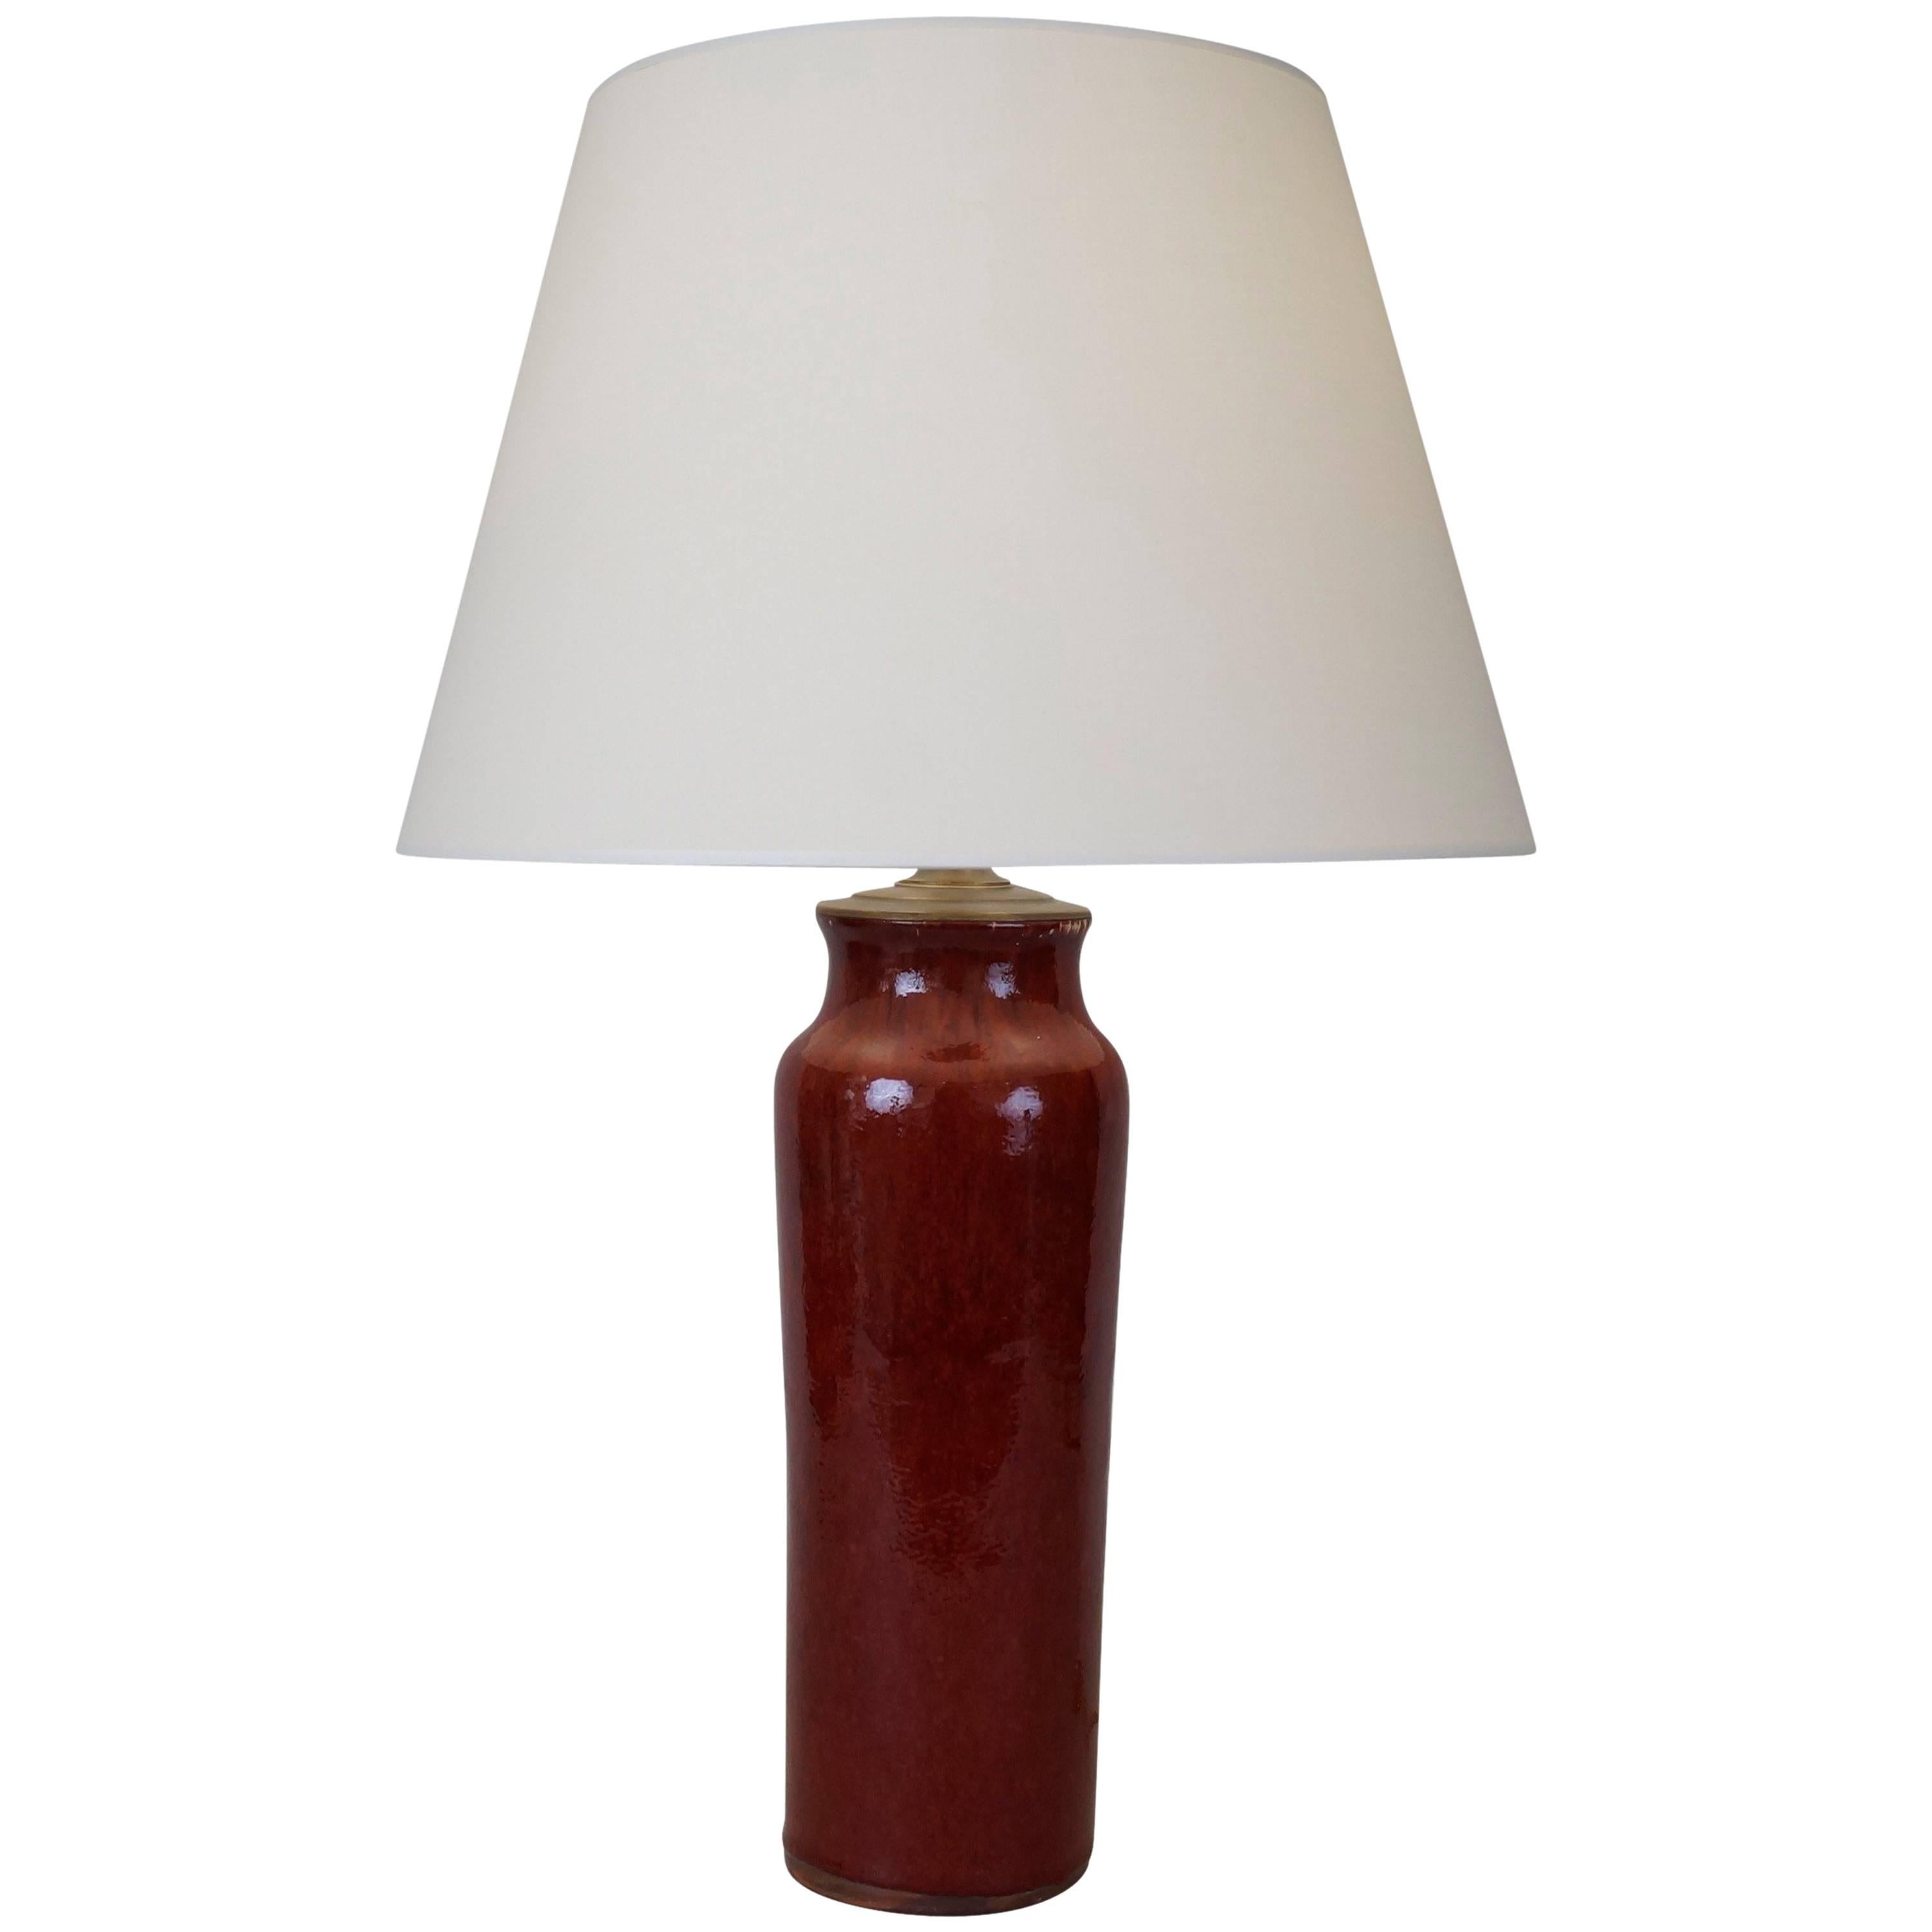 Mid-20th Century Oxblood Red Ceramic Table Lamp For Sale